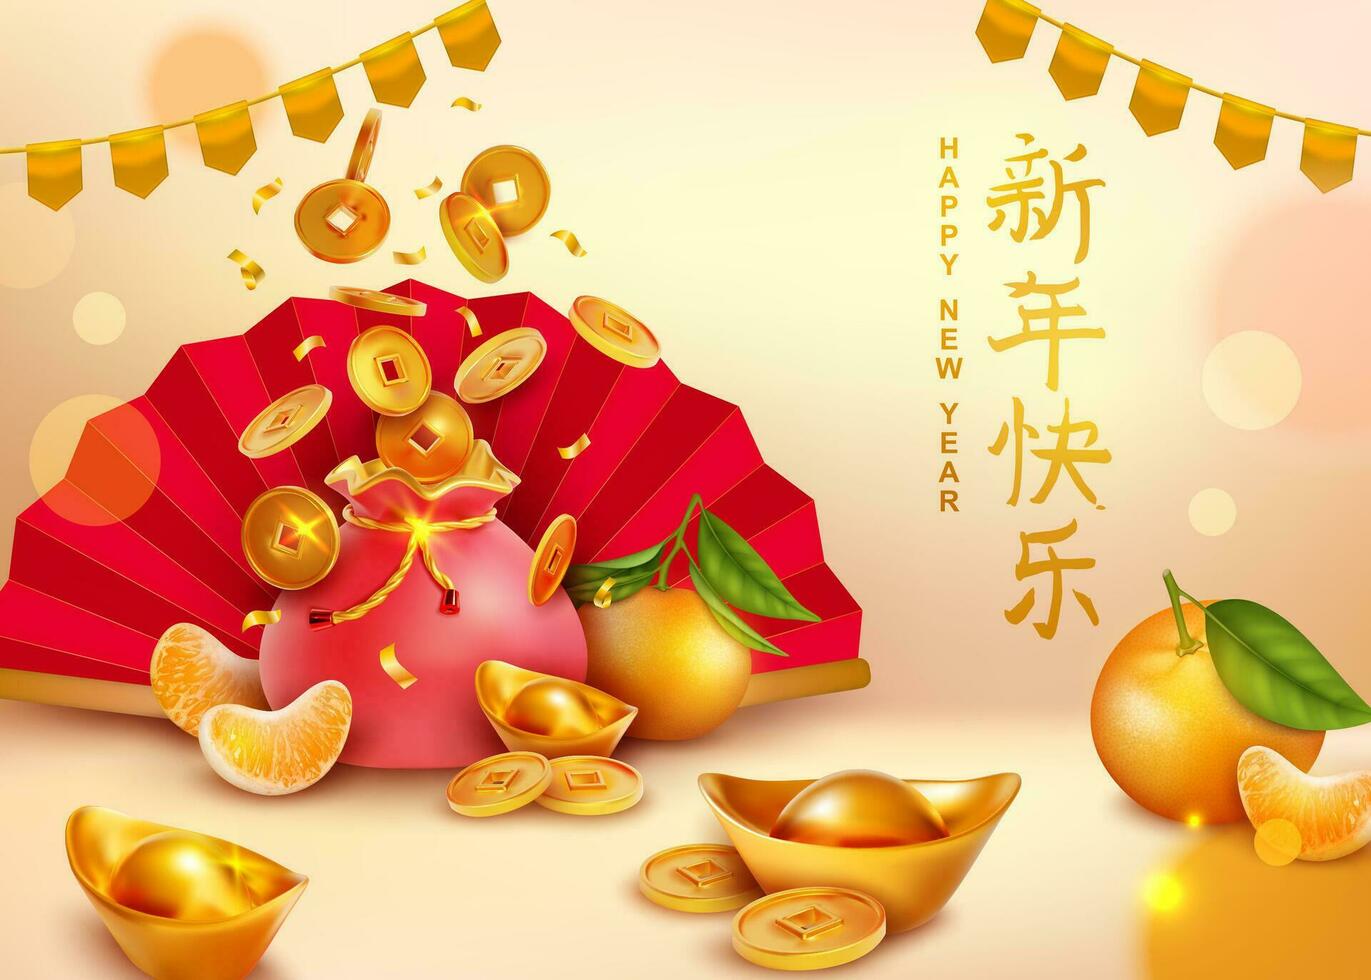 Happy Chinese New Year Concept Poster Card. Vector